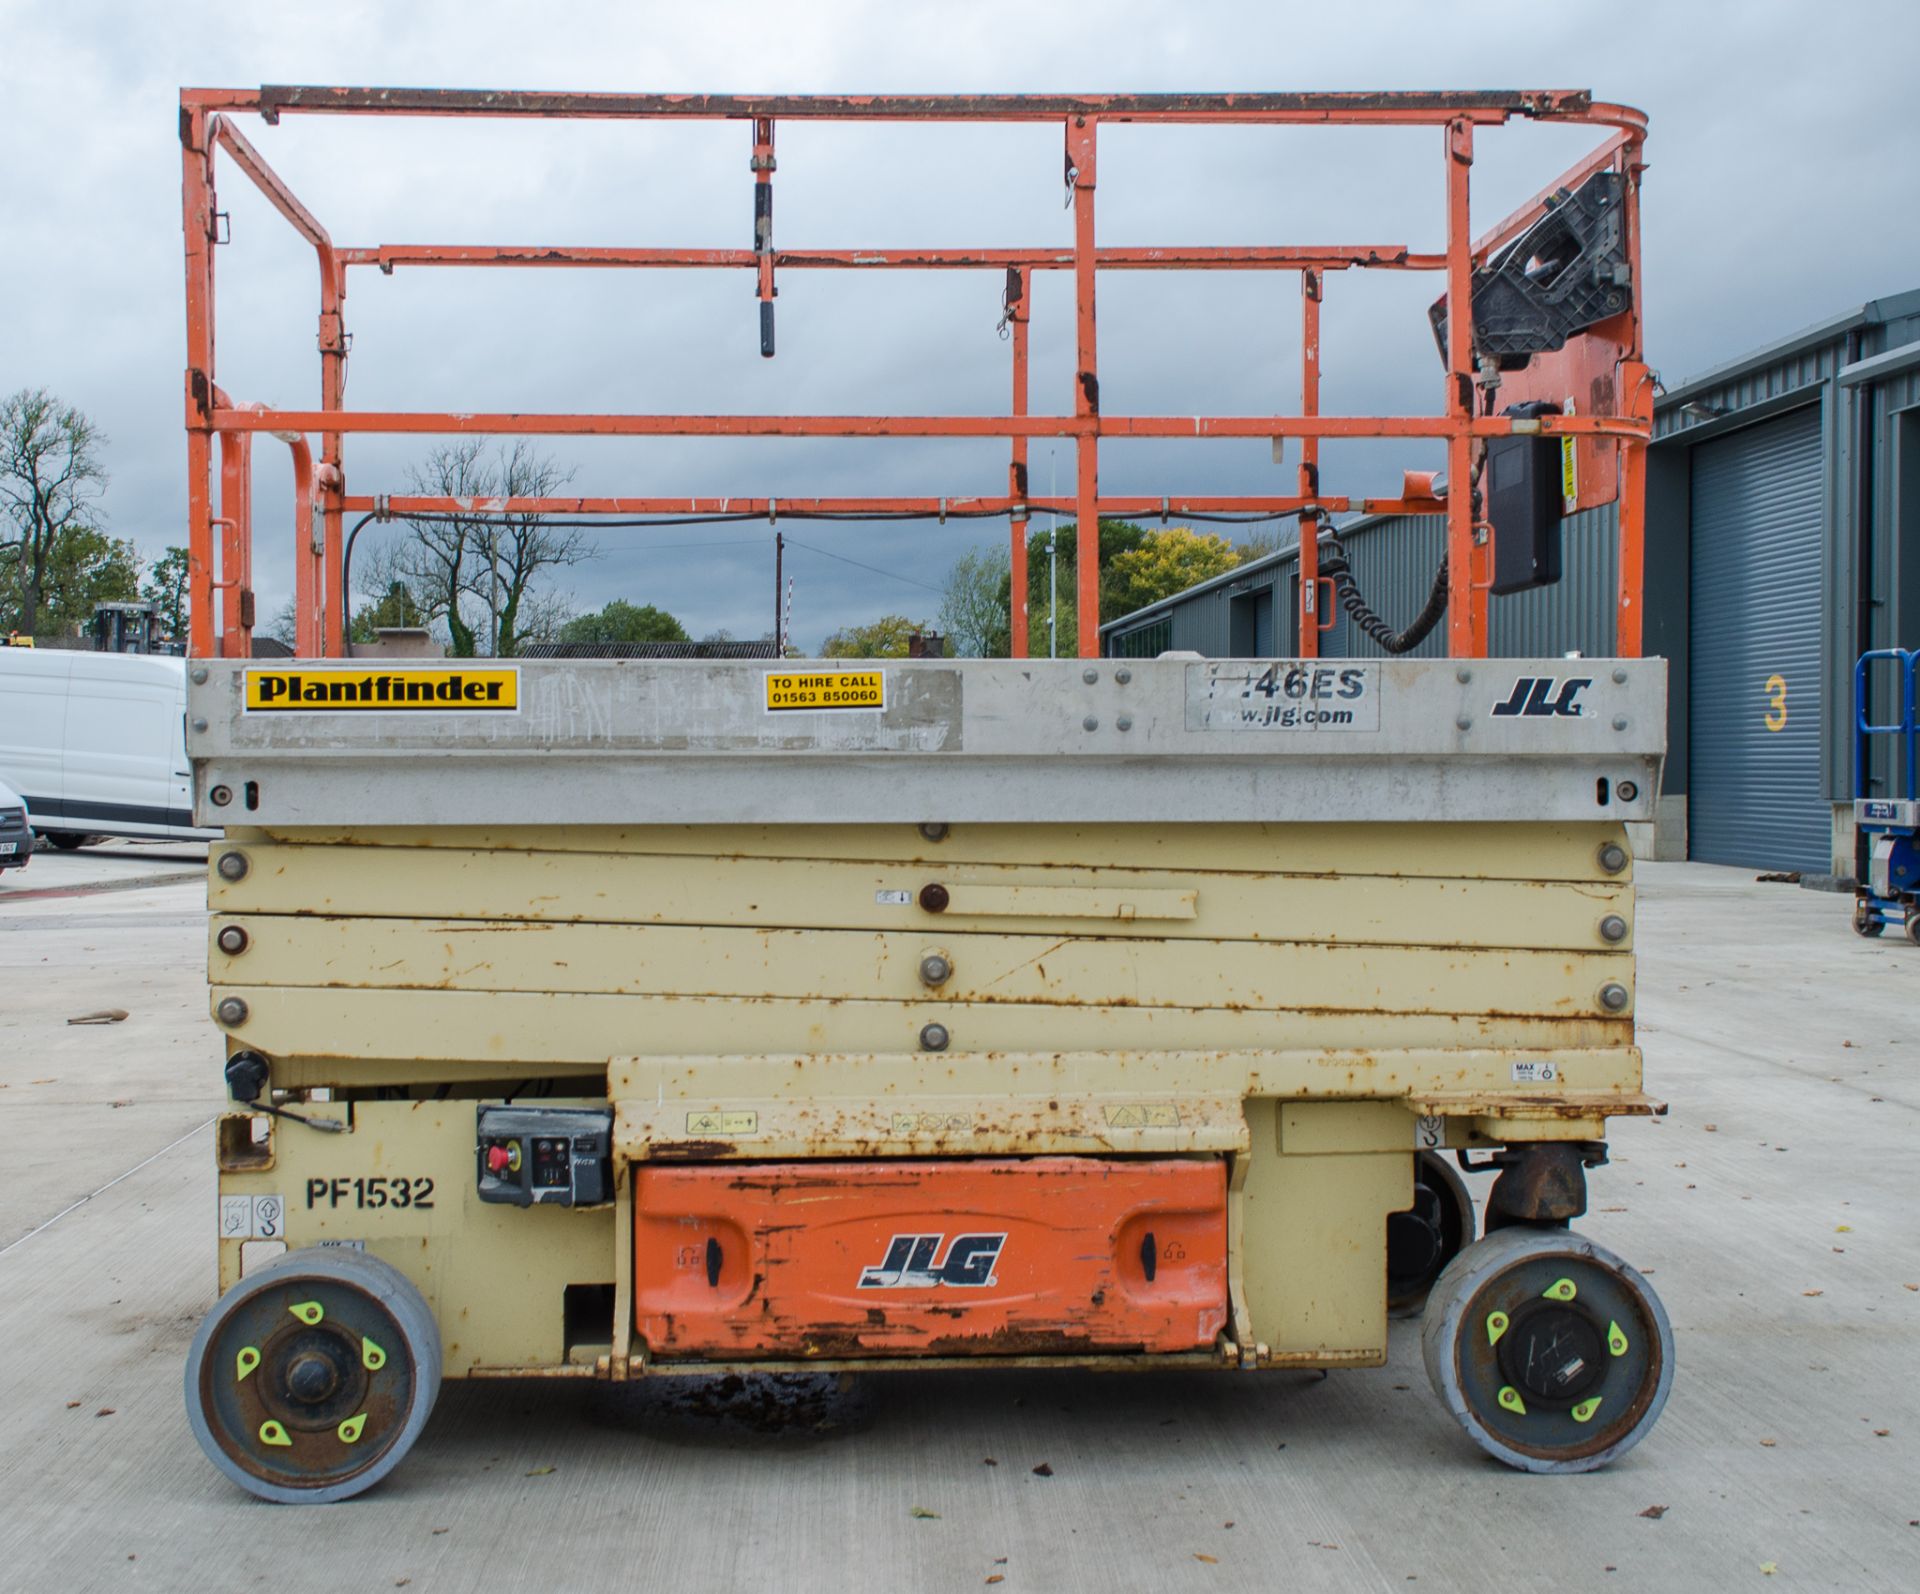 JLG 3246 ES battery electric scissor lift Year:- 2011 S/N: 2037 Recorded hours:- 416 PF1532 - Image 7 of 12